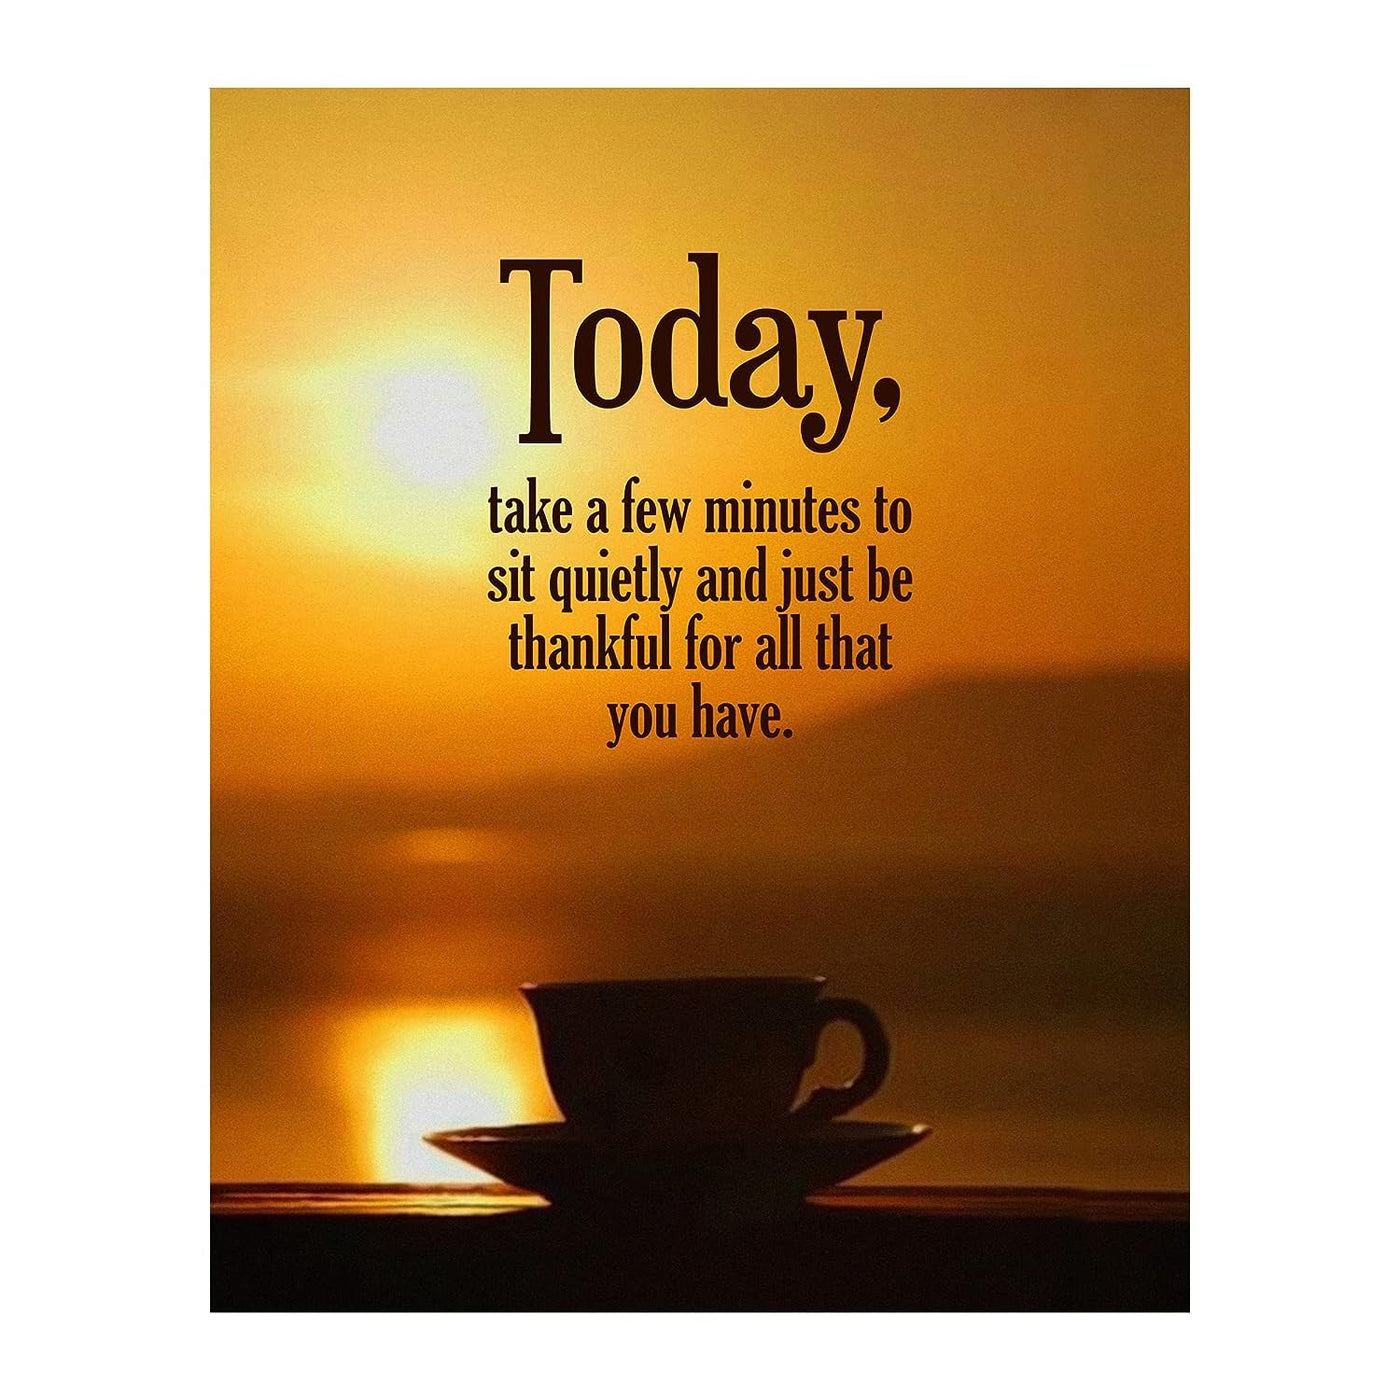 Today-Take a Few Minutes to Be Thankful Inspirational Christian Wall Sign -8 x 10" Sunset Print w/Coffee Mug Image- Ready to Frame. Motivational Decor for Home-Office-School-Work. Great Advice!